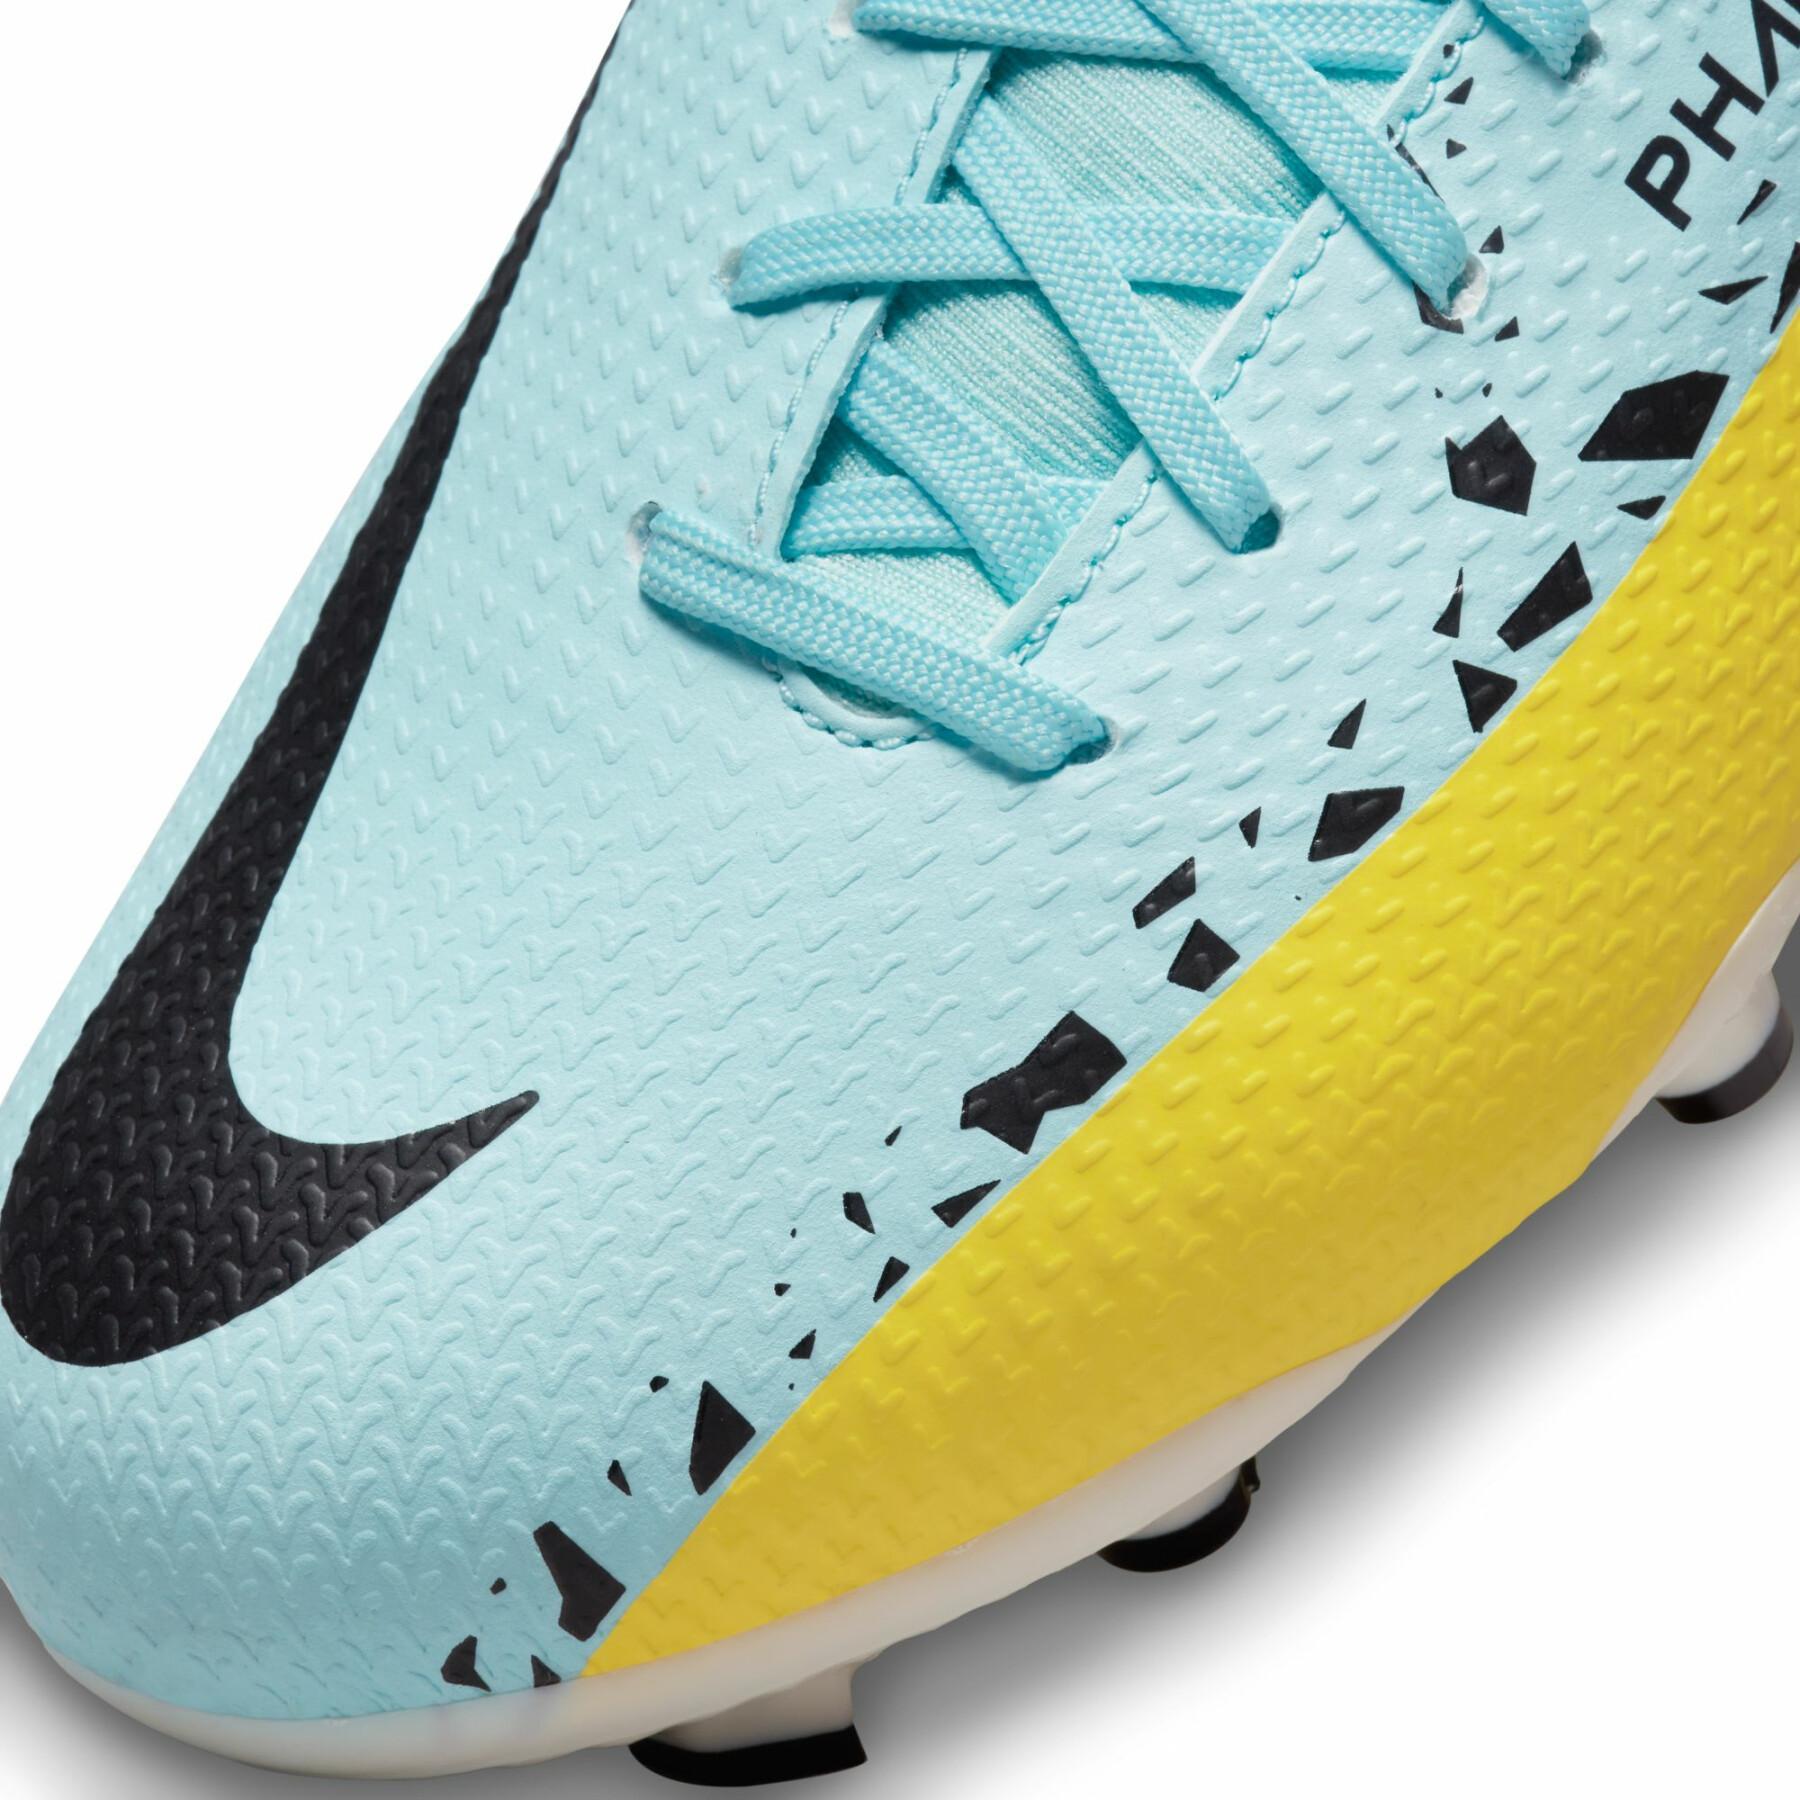 Chaussures de football enfant Nike Phantom GT2 Academy Dynamic Fit MG - Lucent Pack